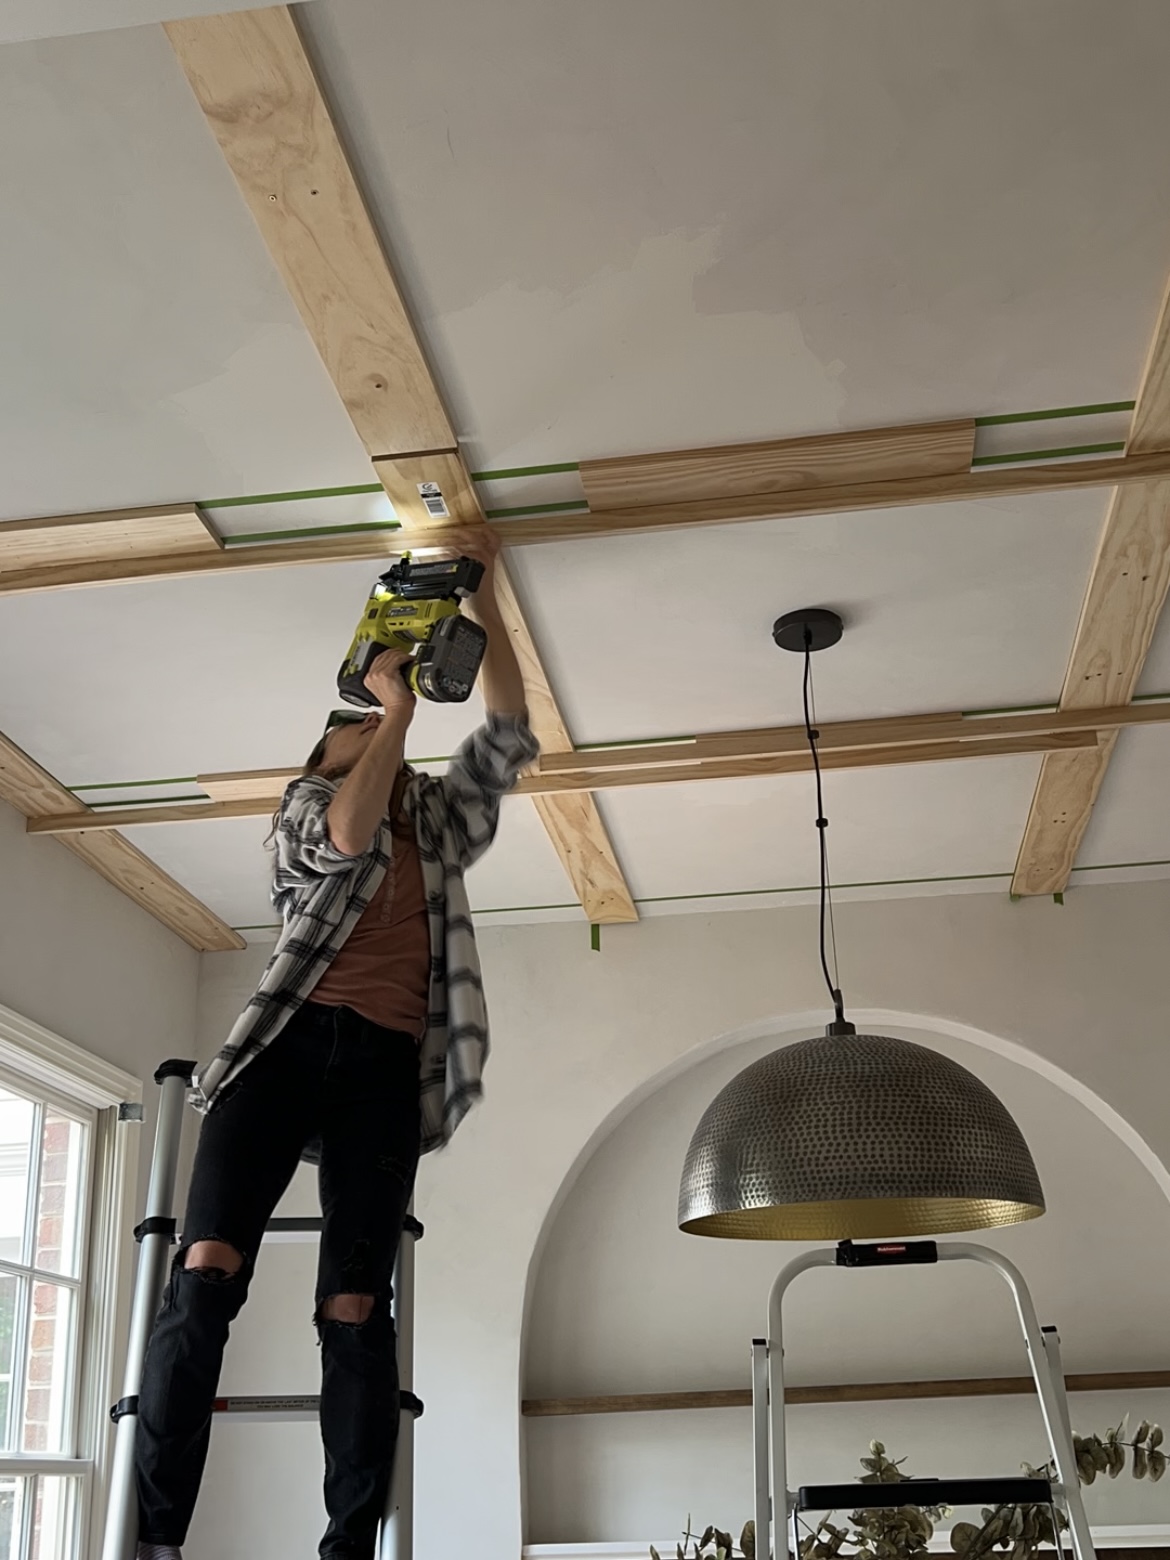 Woman attaching1x6 boards to the ceiling in a grid pattern, using a nail gun.